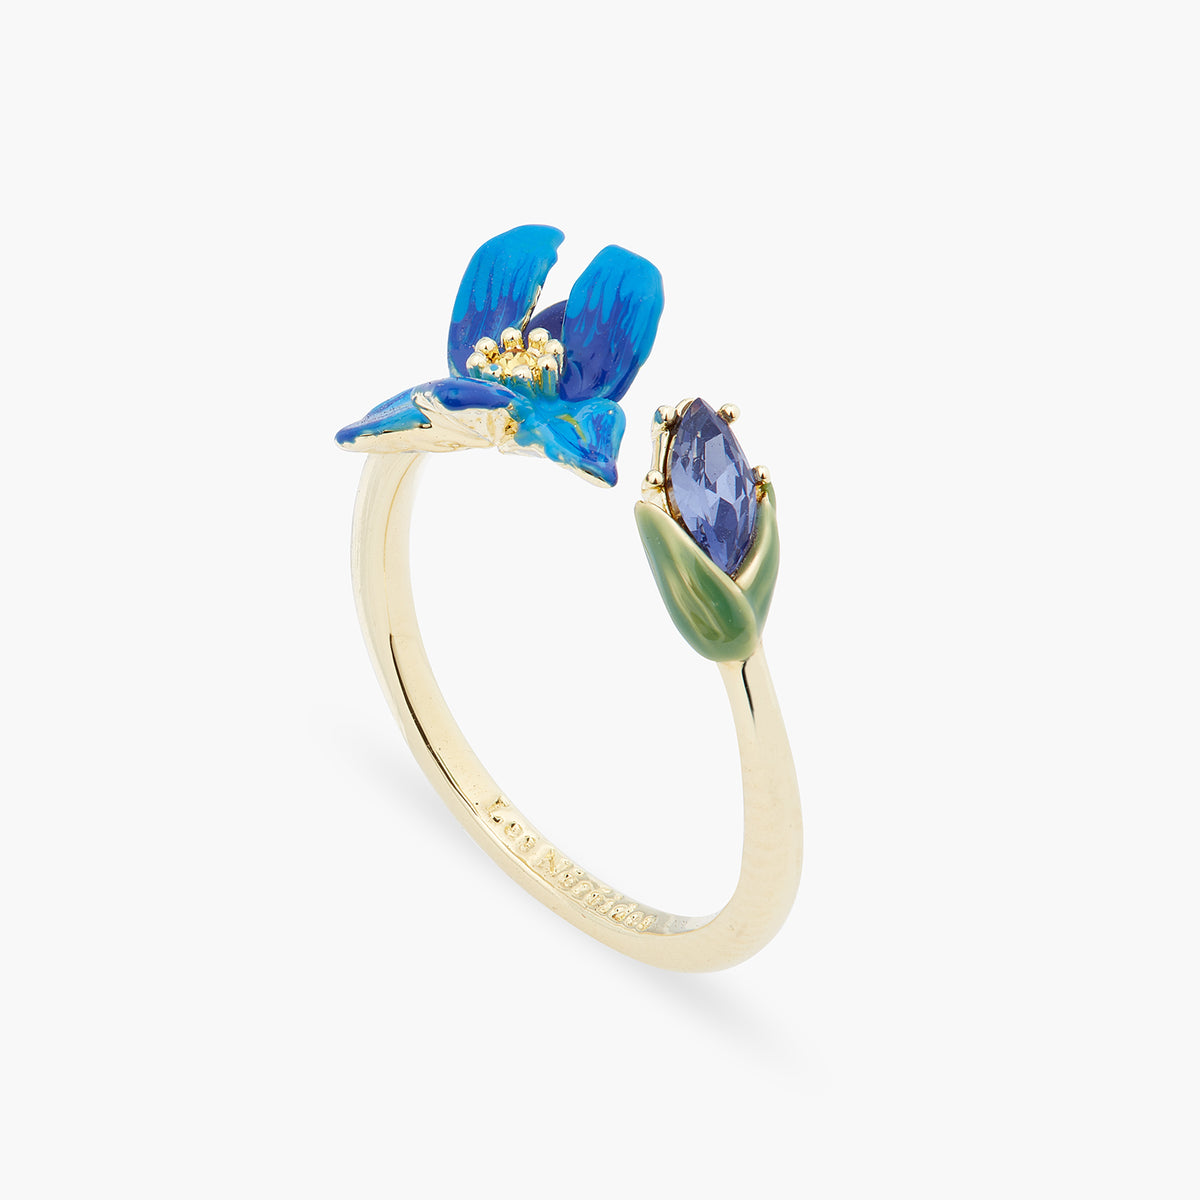 Siberian Iris and Faceted Glass Adjustable Ring